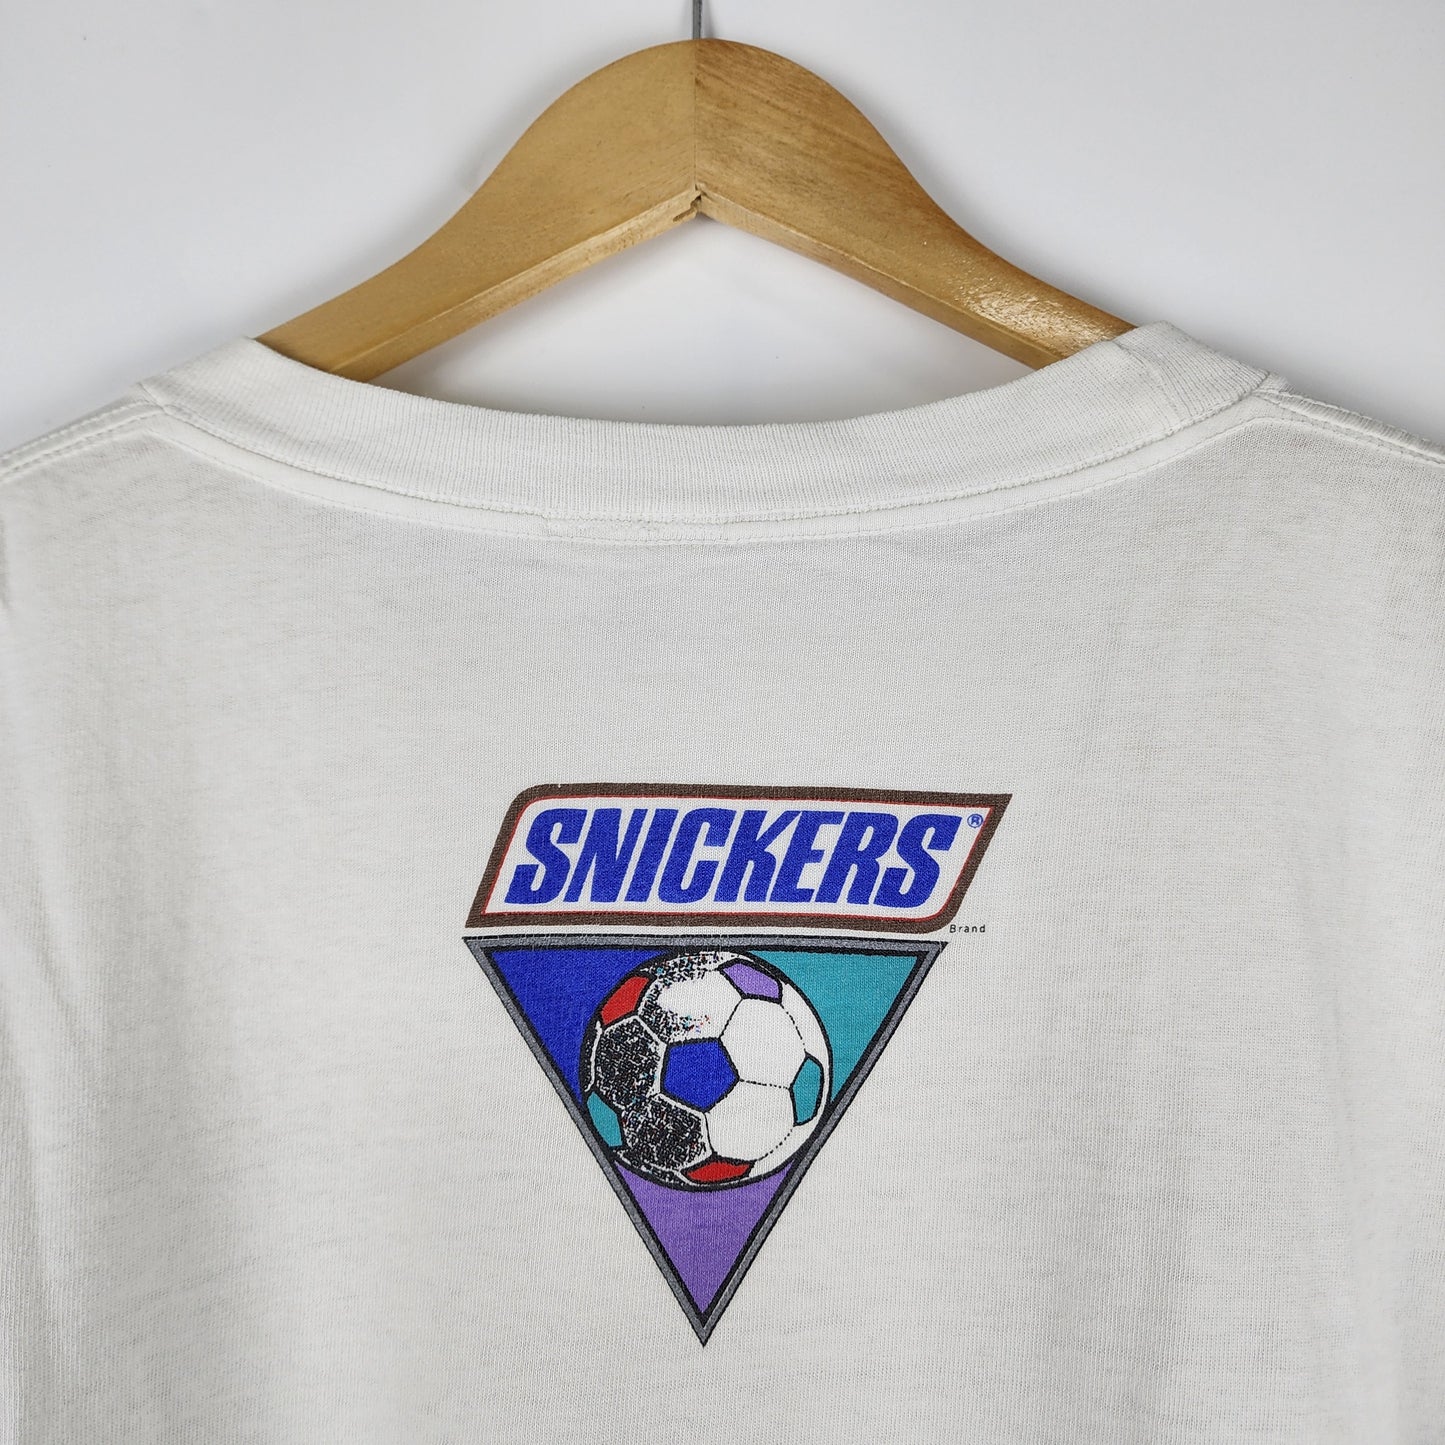 Vintage Snickers x USA Fifa World Cup 1994 T-shirt